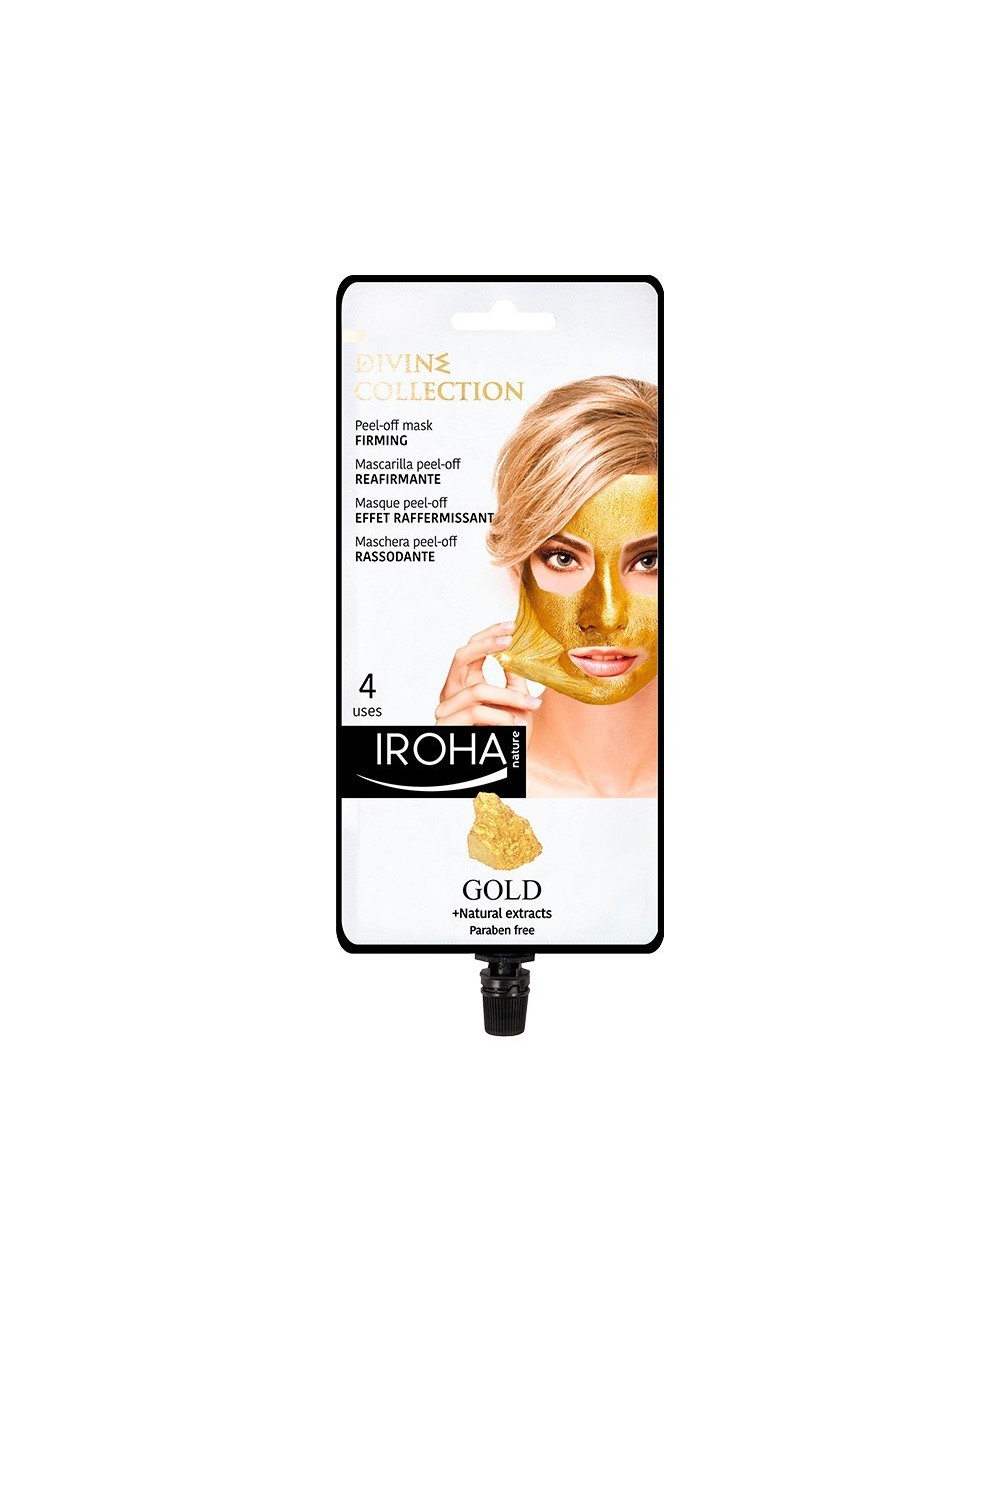 Iroha Nature Gold Peel Off Mask Firming 4 Uses